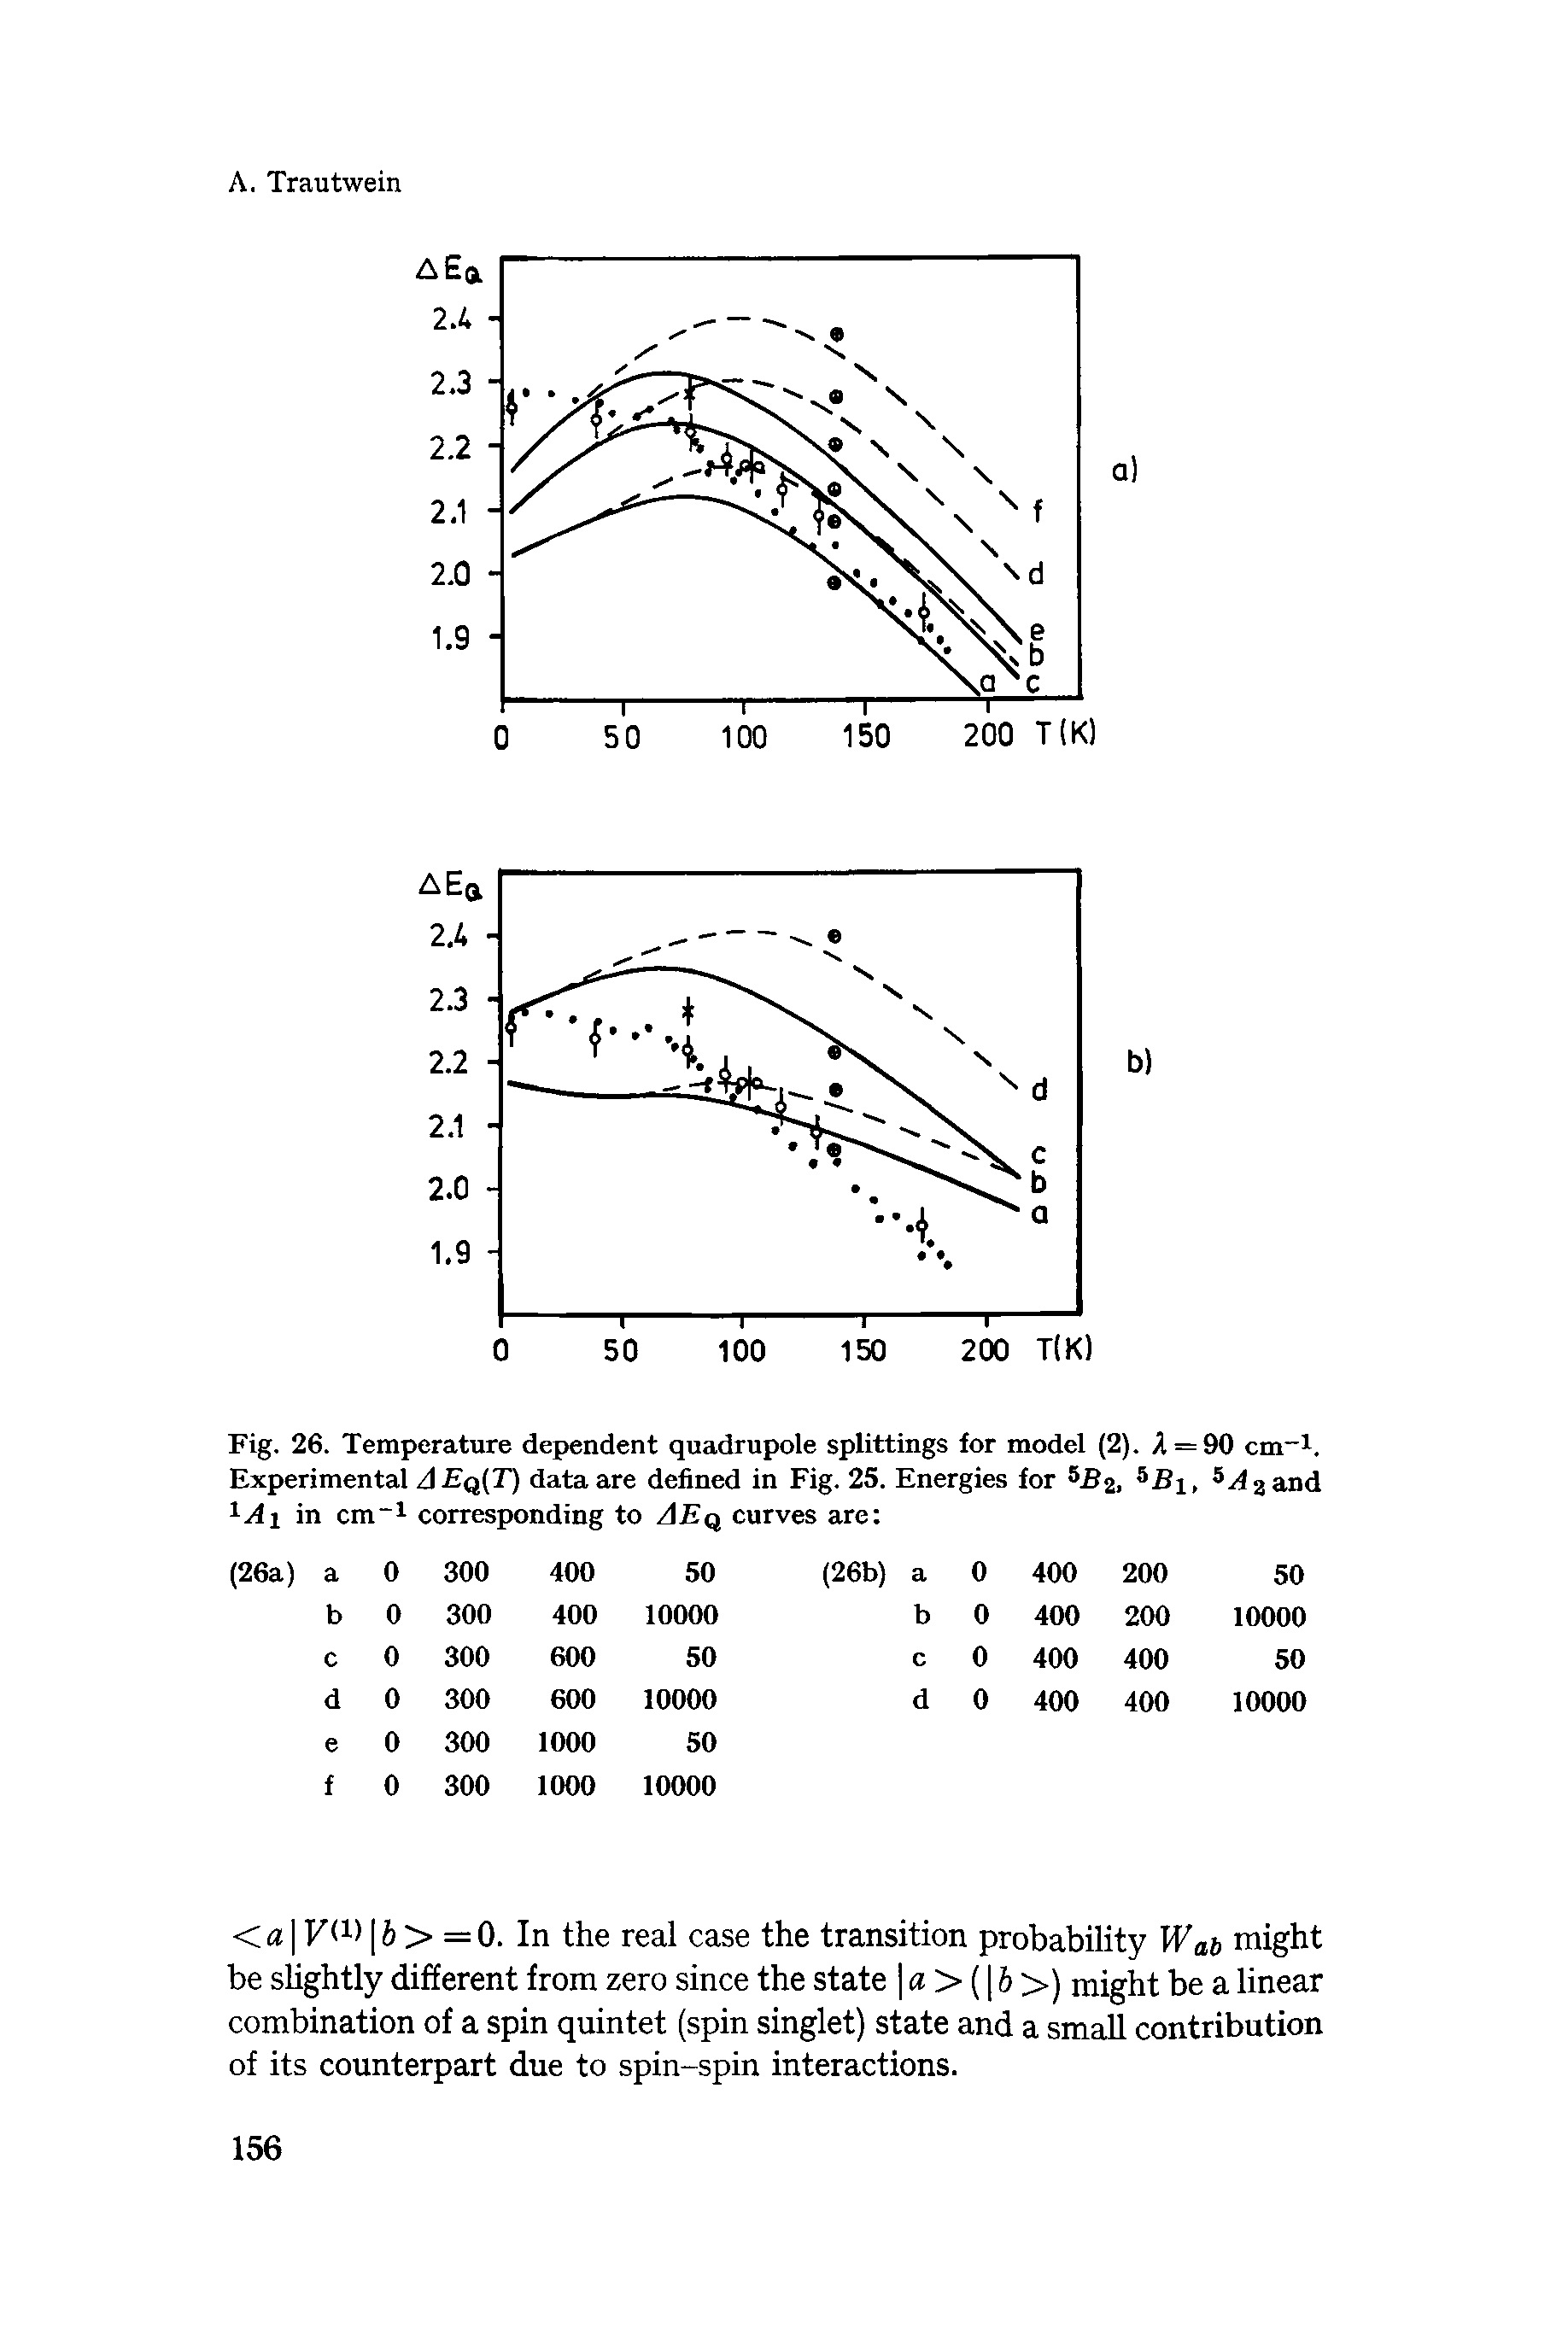 Fig. 26. Temperature dependent quadrupole splittings for model (2). A = 90 cm-1. Experimental AEq(T) data are defined in Fig. 25. Energies for 5B2, bB, A and 1A1 in cm-1 corresponding to AEq curves are ...